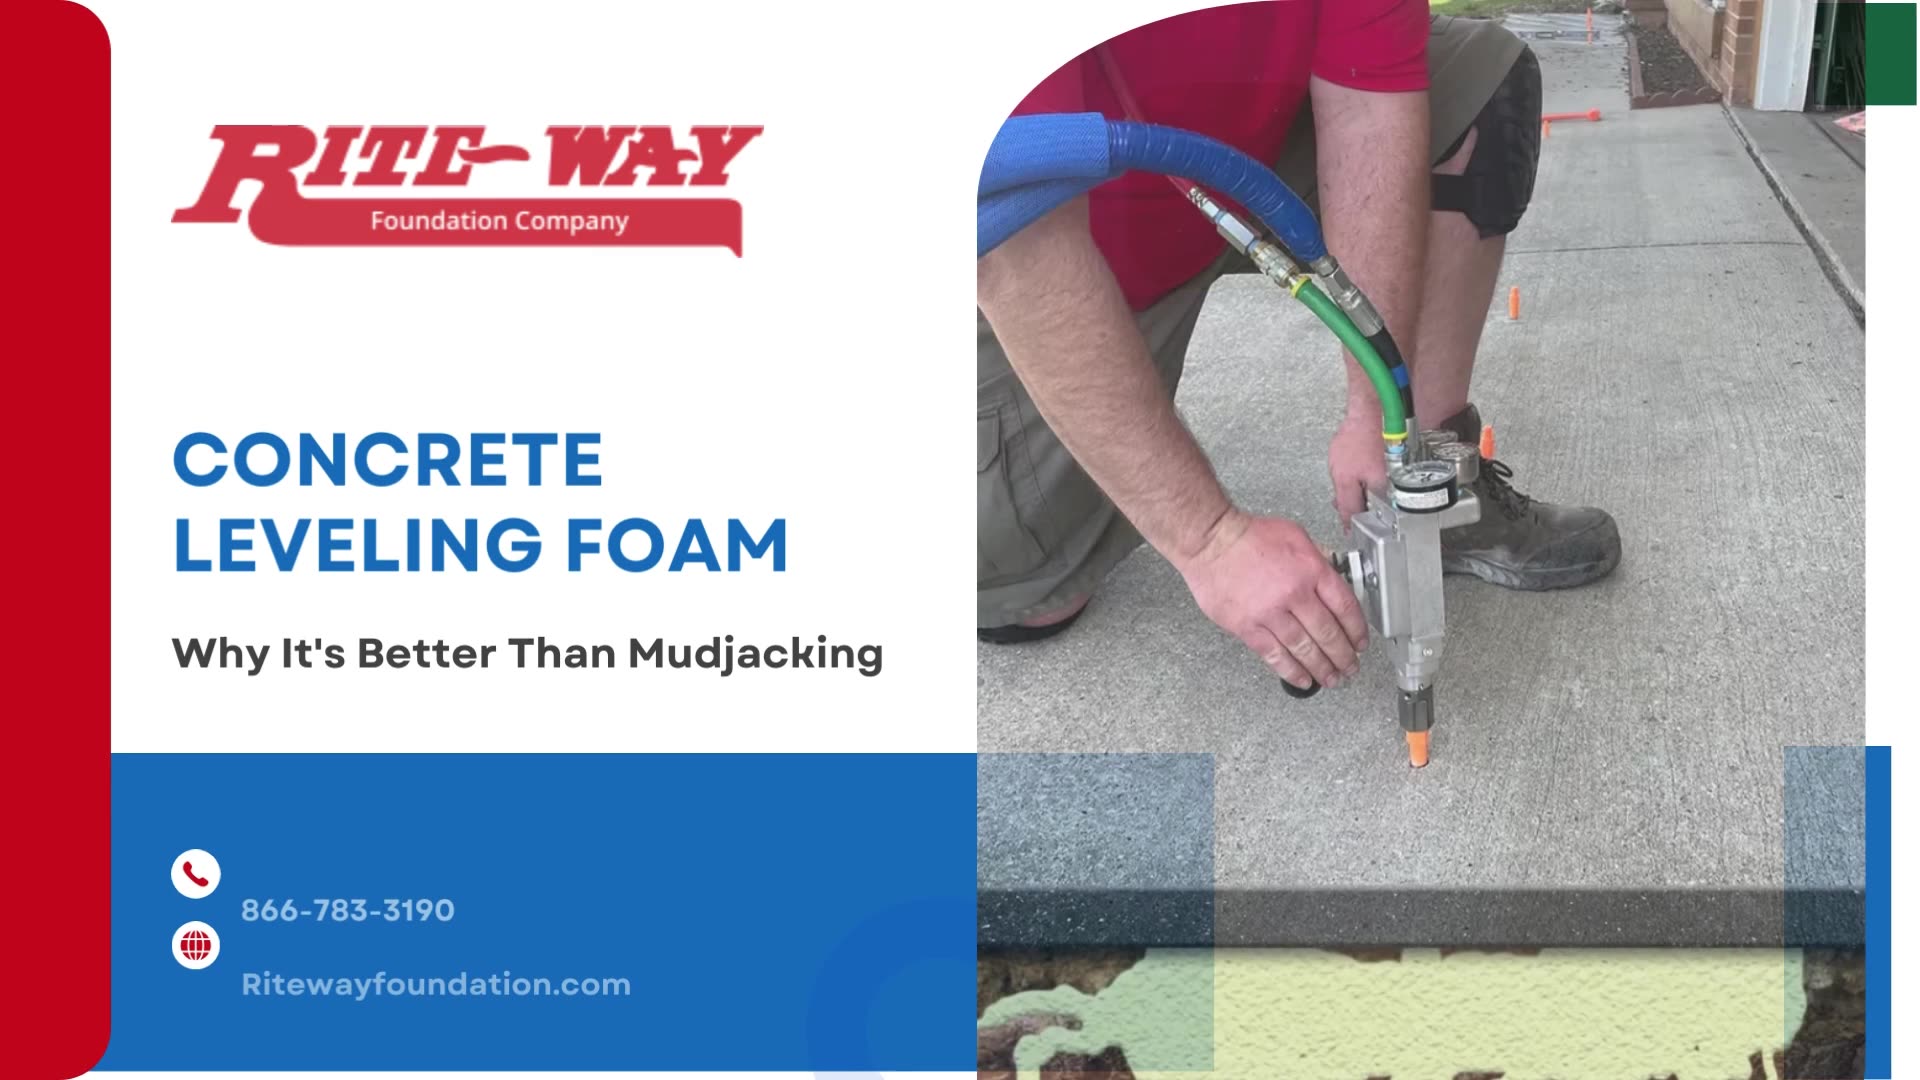 Concrete Leveling Foam: Why It's Better Than Mudjacking